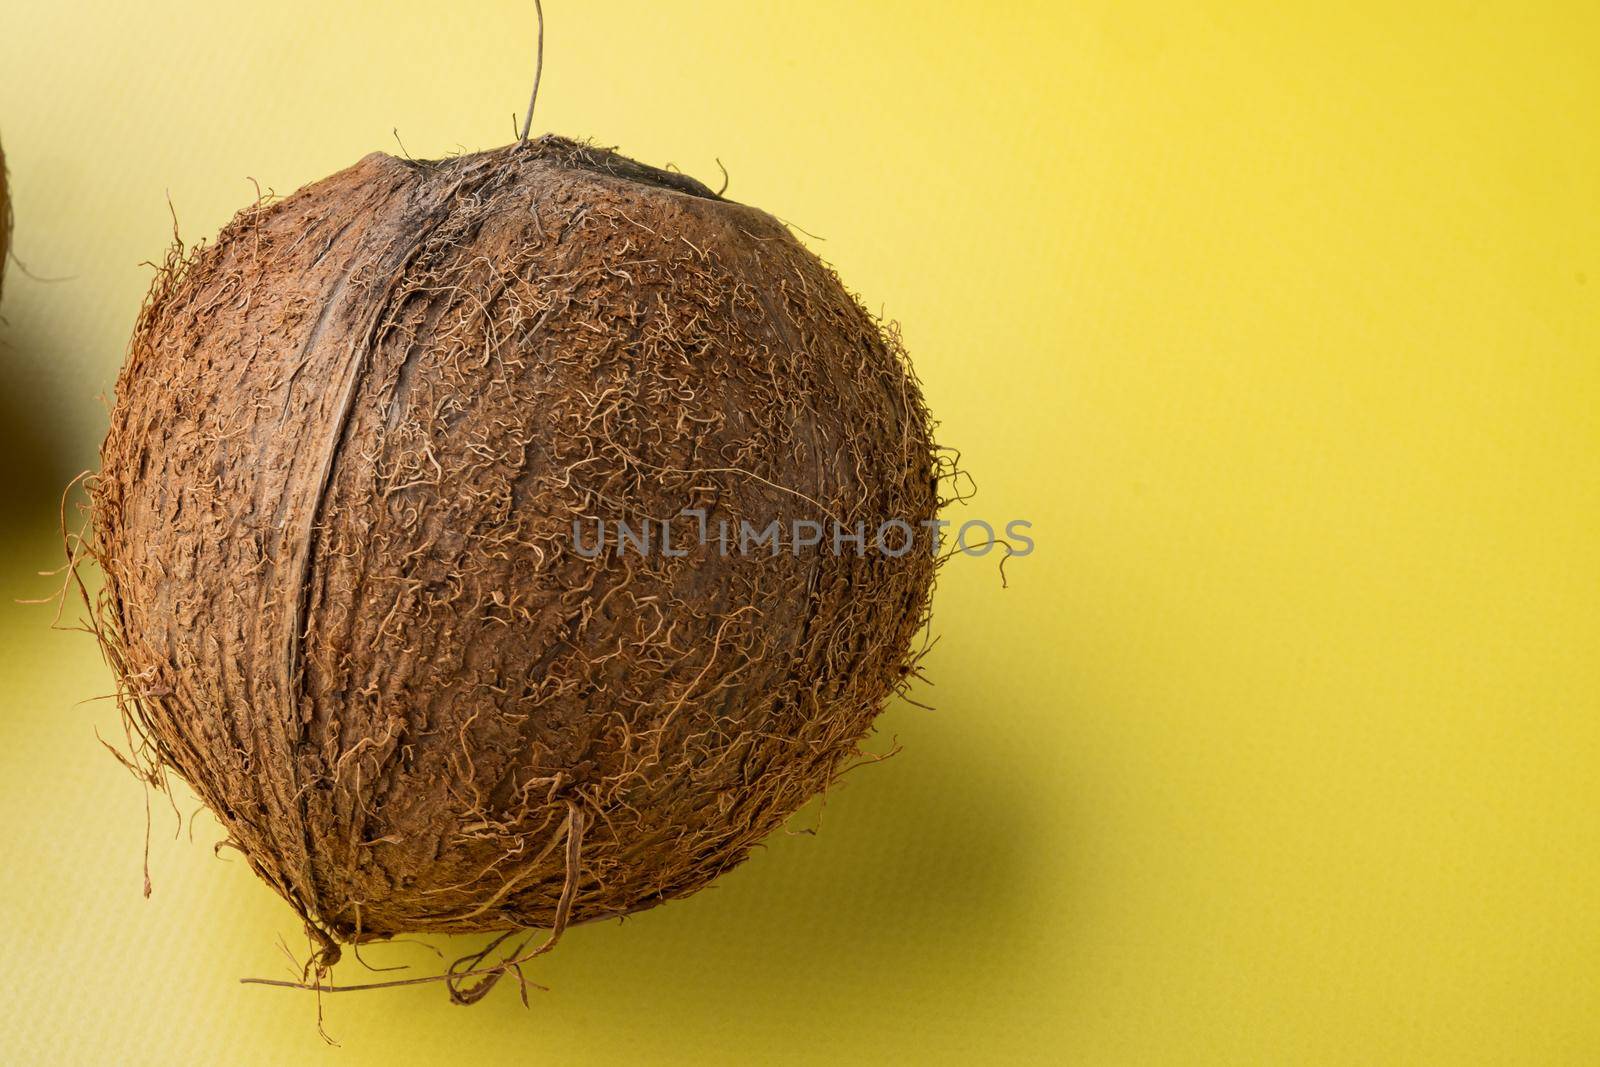 Freshly harvested coconut set, on yellow textured summer background